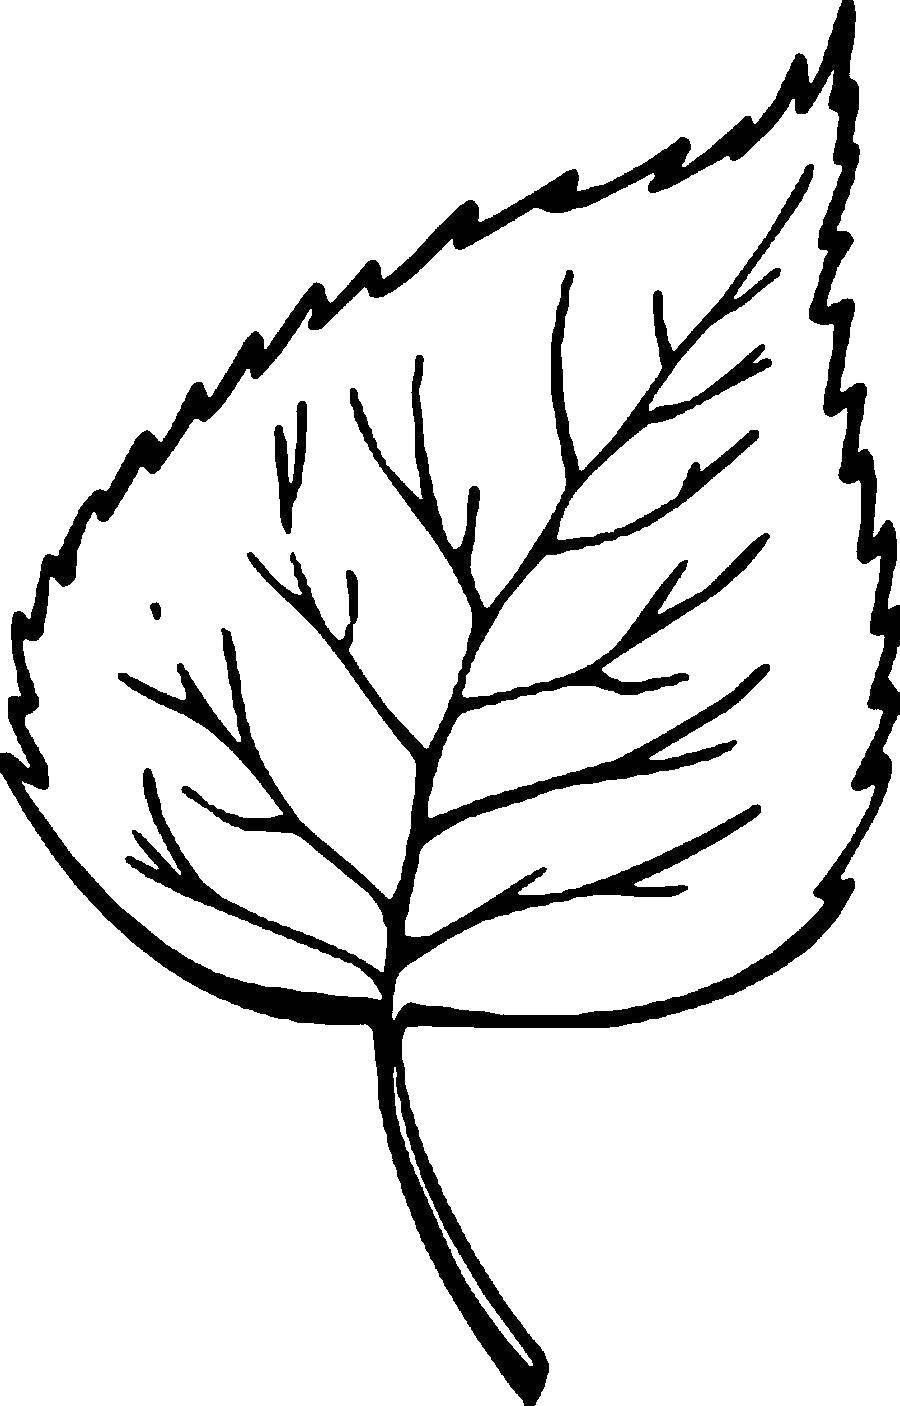 Coloring Leaf Linden. Category The contours of the leaves. Tags:  leaf.